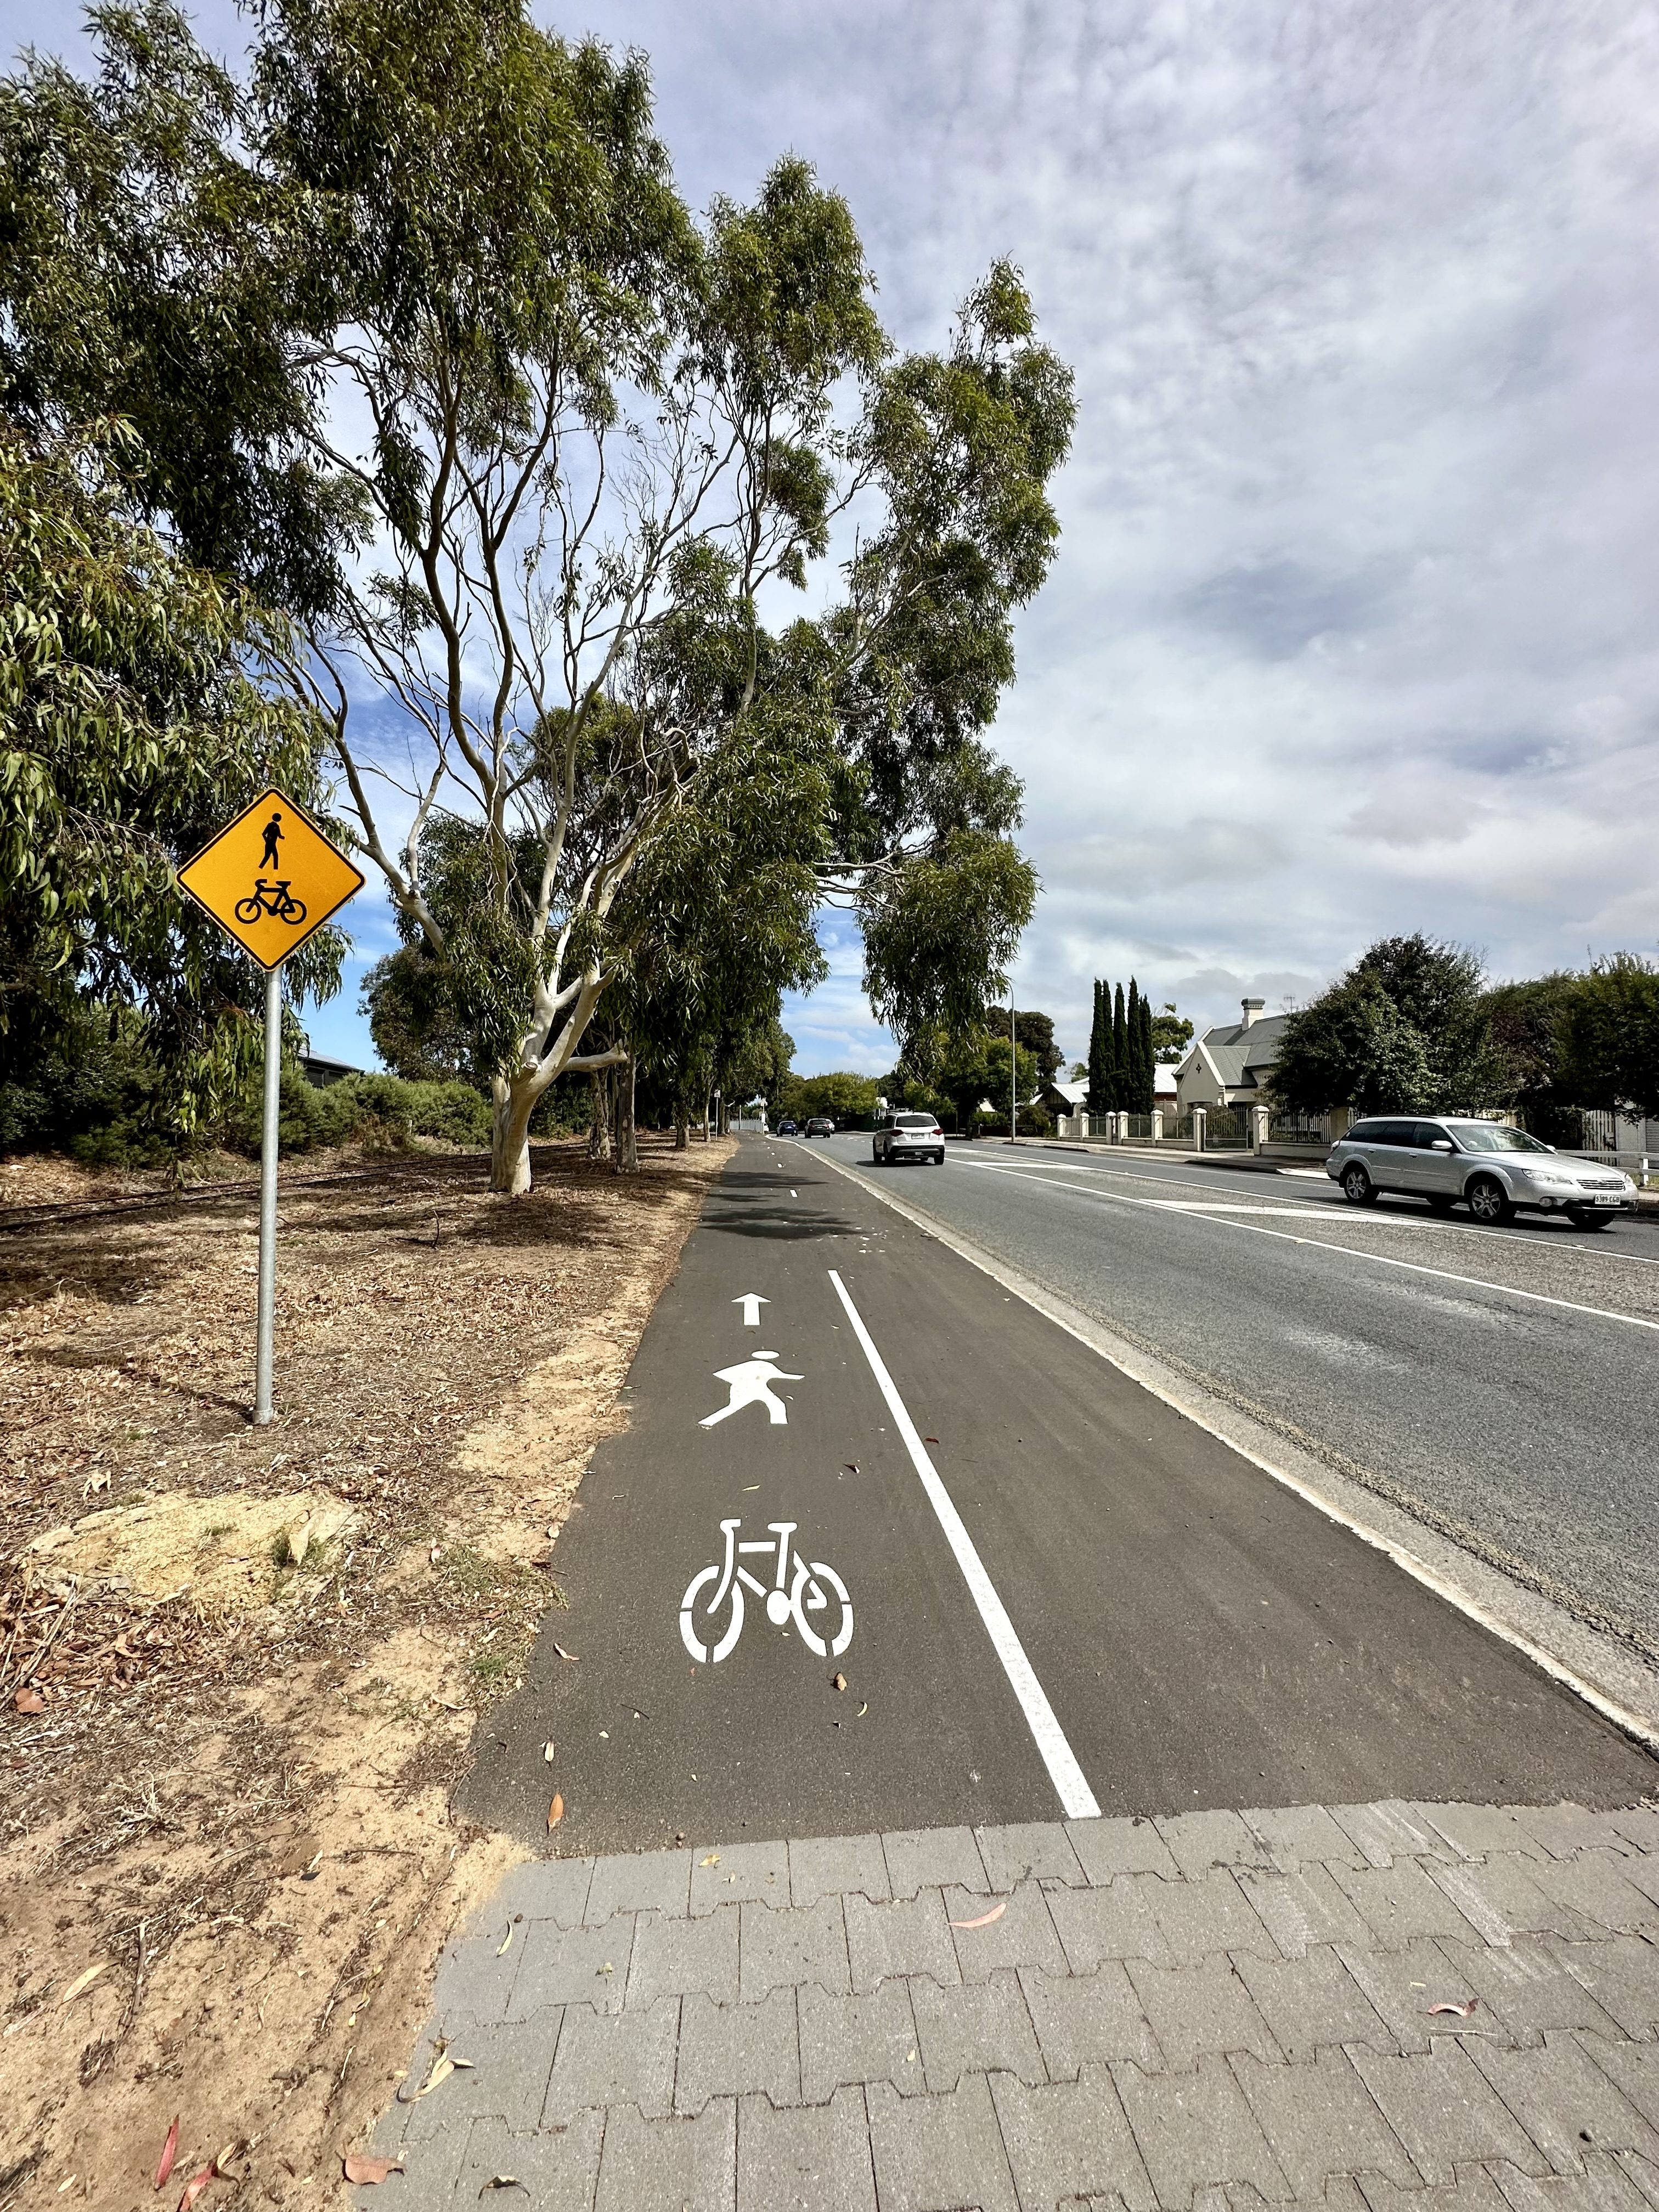 Hindmarsh Road Shared Path after image